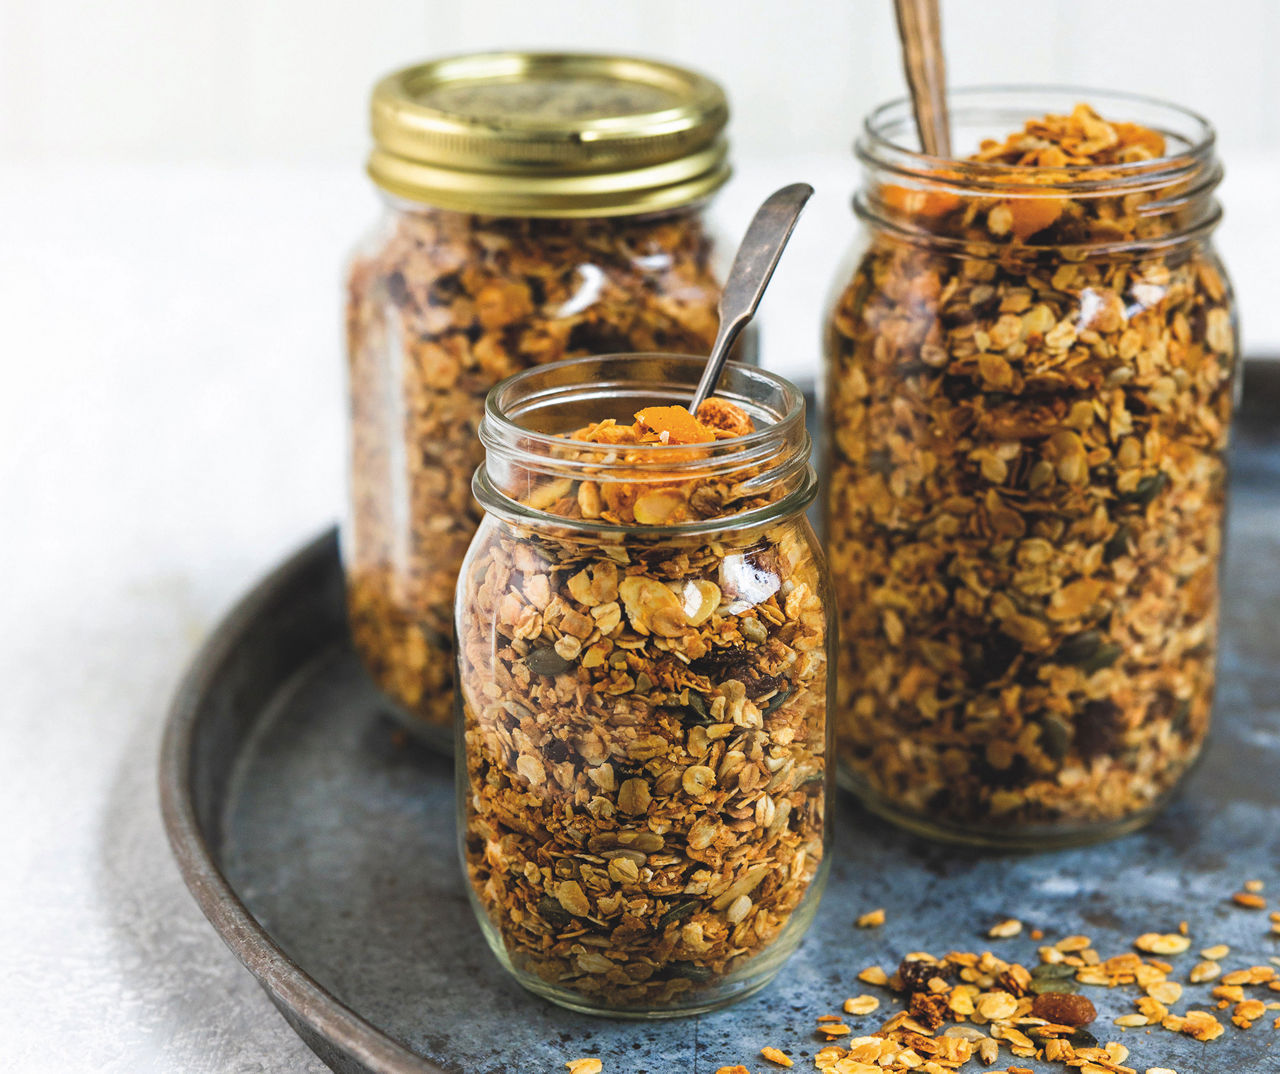 A tray with jars filled with granola